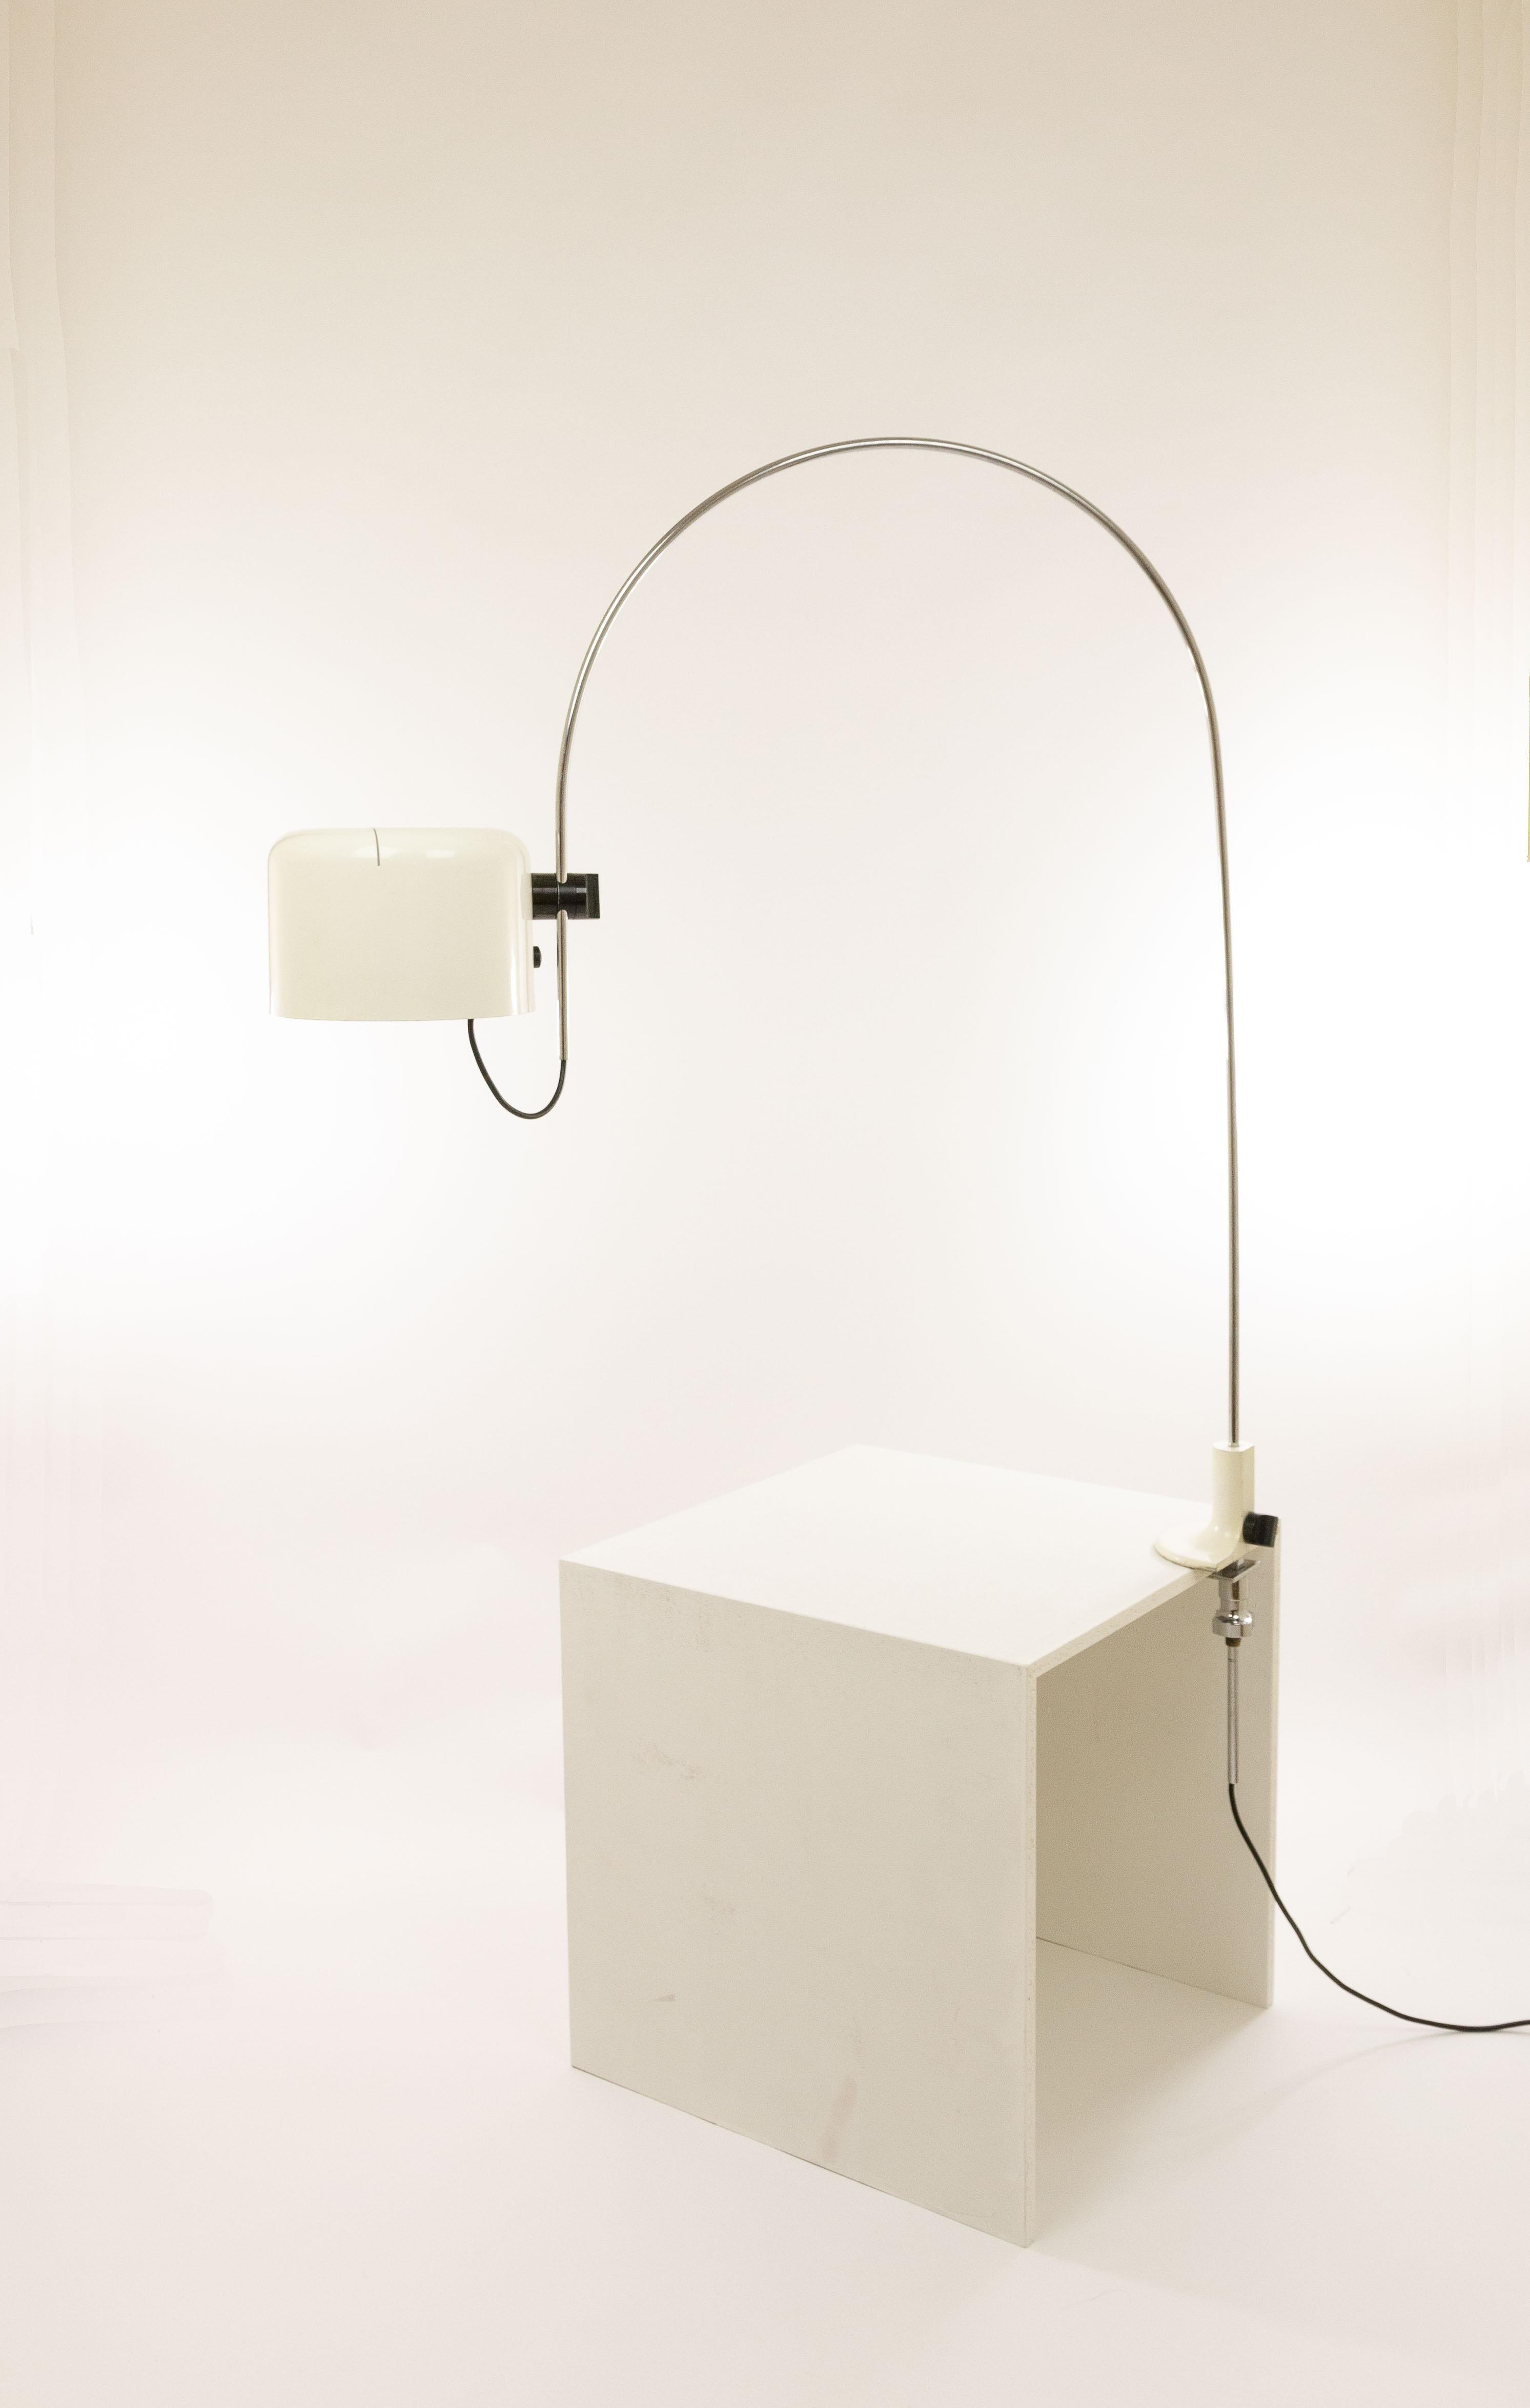 Beautiful and rare clamp table lamp Coupé manufactured by O-Luce, designed by Joe Colombo in 1967.

The lamp consists of a large arched arm and a white cylindrical shaped shade. The lamp is adjustable in many ways. The white clamping element on